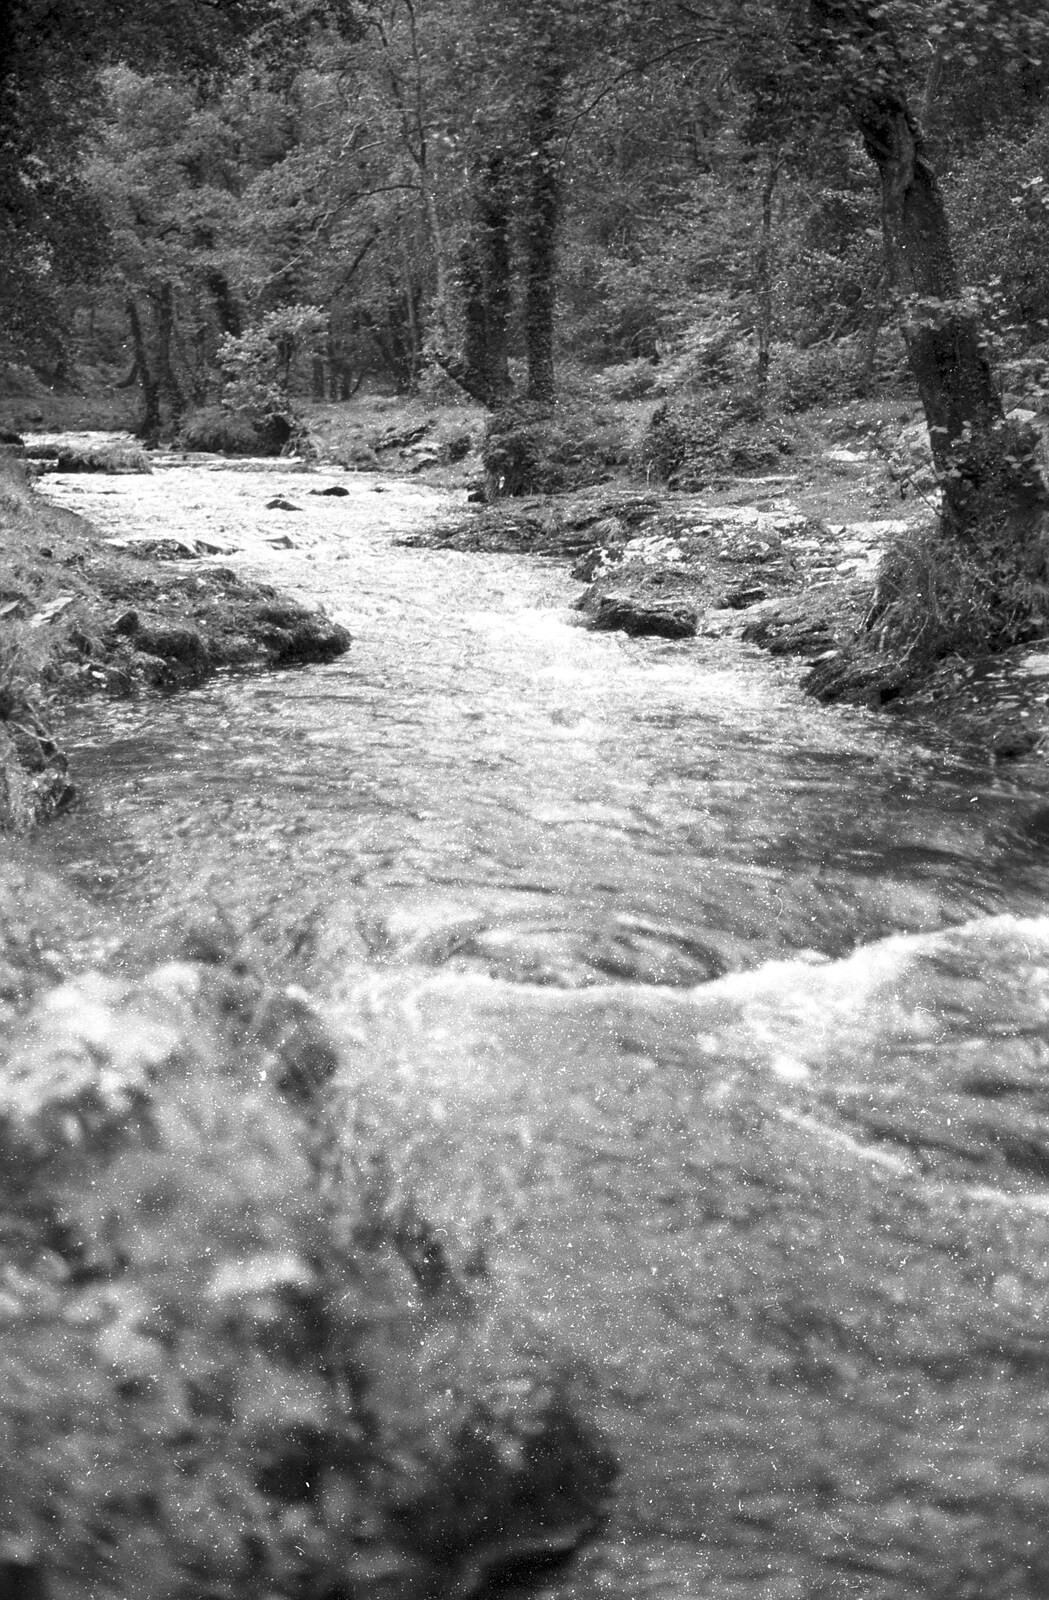 London Party and a Trip to Mother's, Hoo Meavy, Devon - 5th August 1993: A river scene